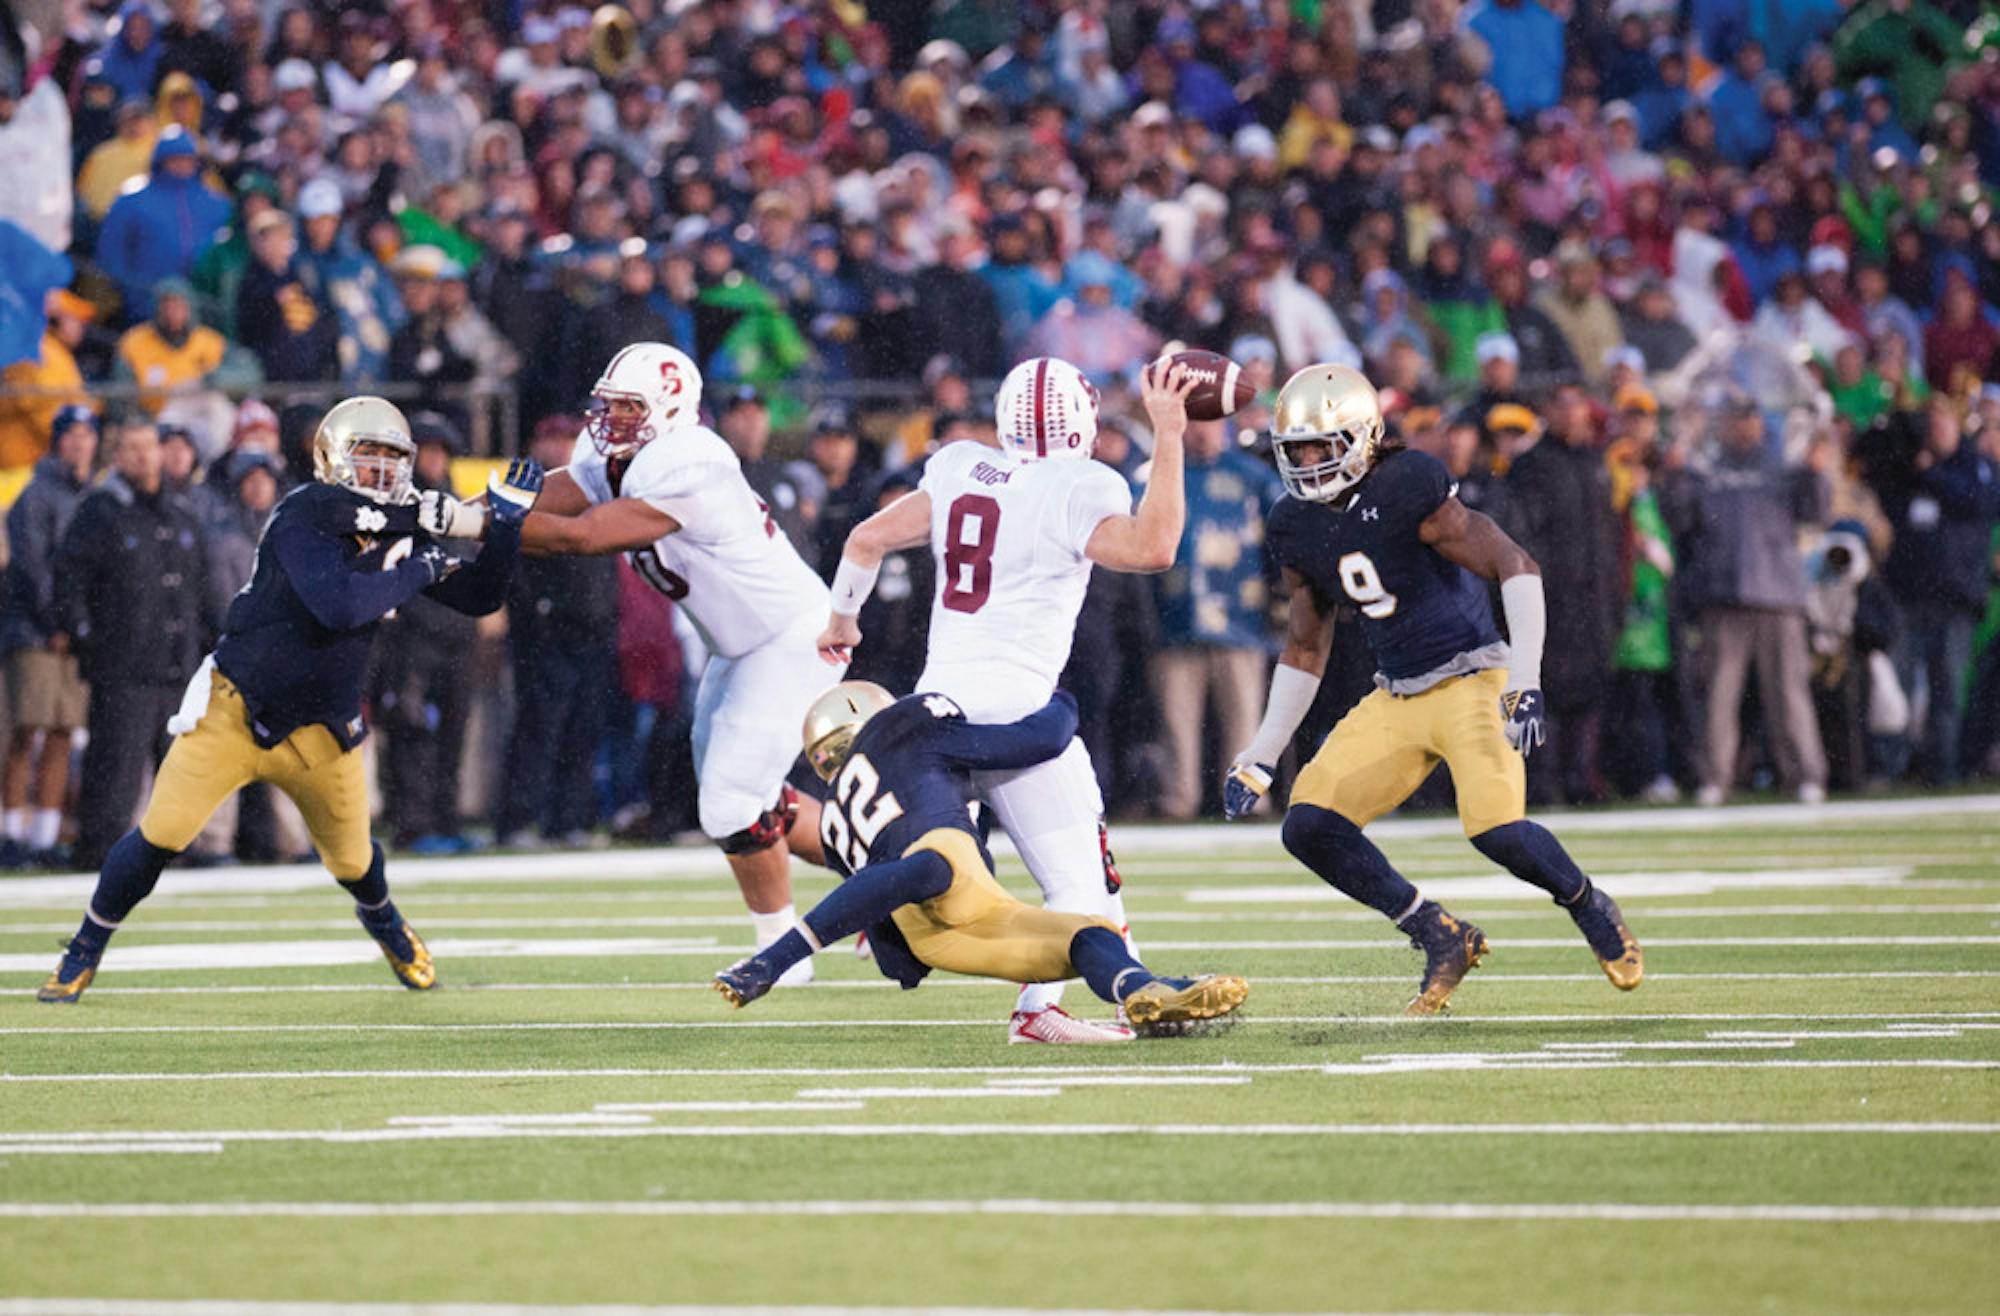 No 7 20141004, 2014-2015, 20141004, Football, Kevin Song, Notre Dame Stadium, Schumate, Smith, vs Stanford